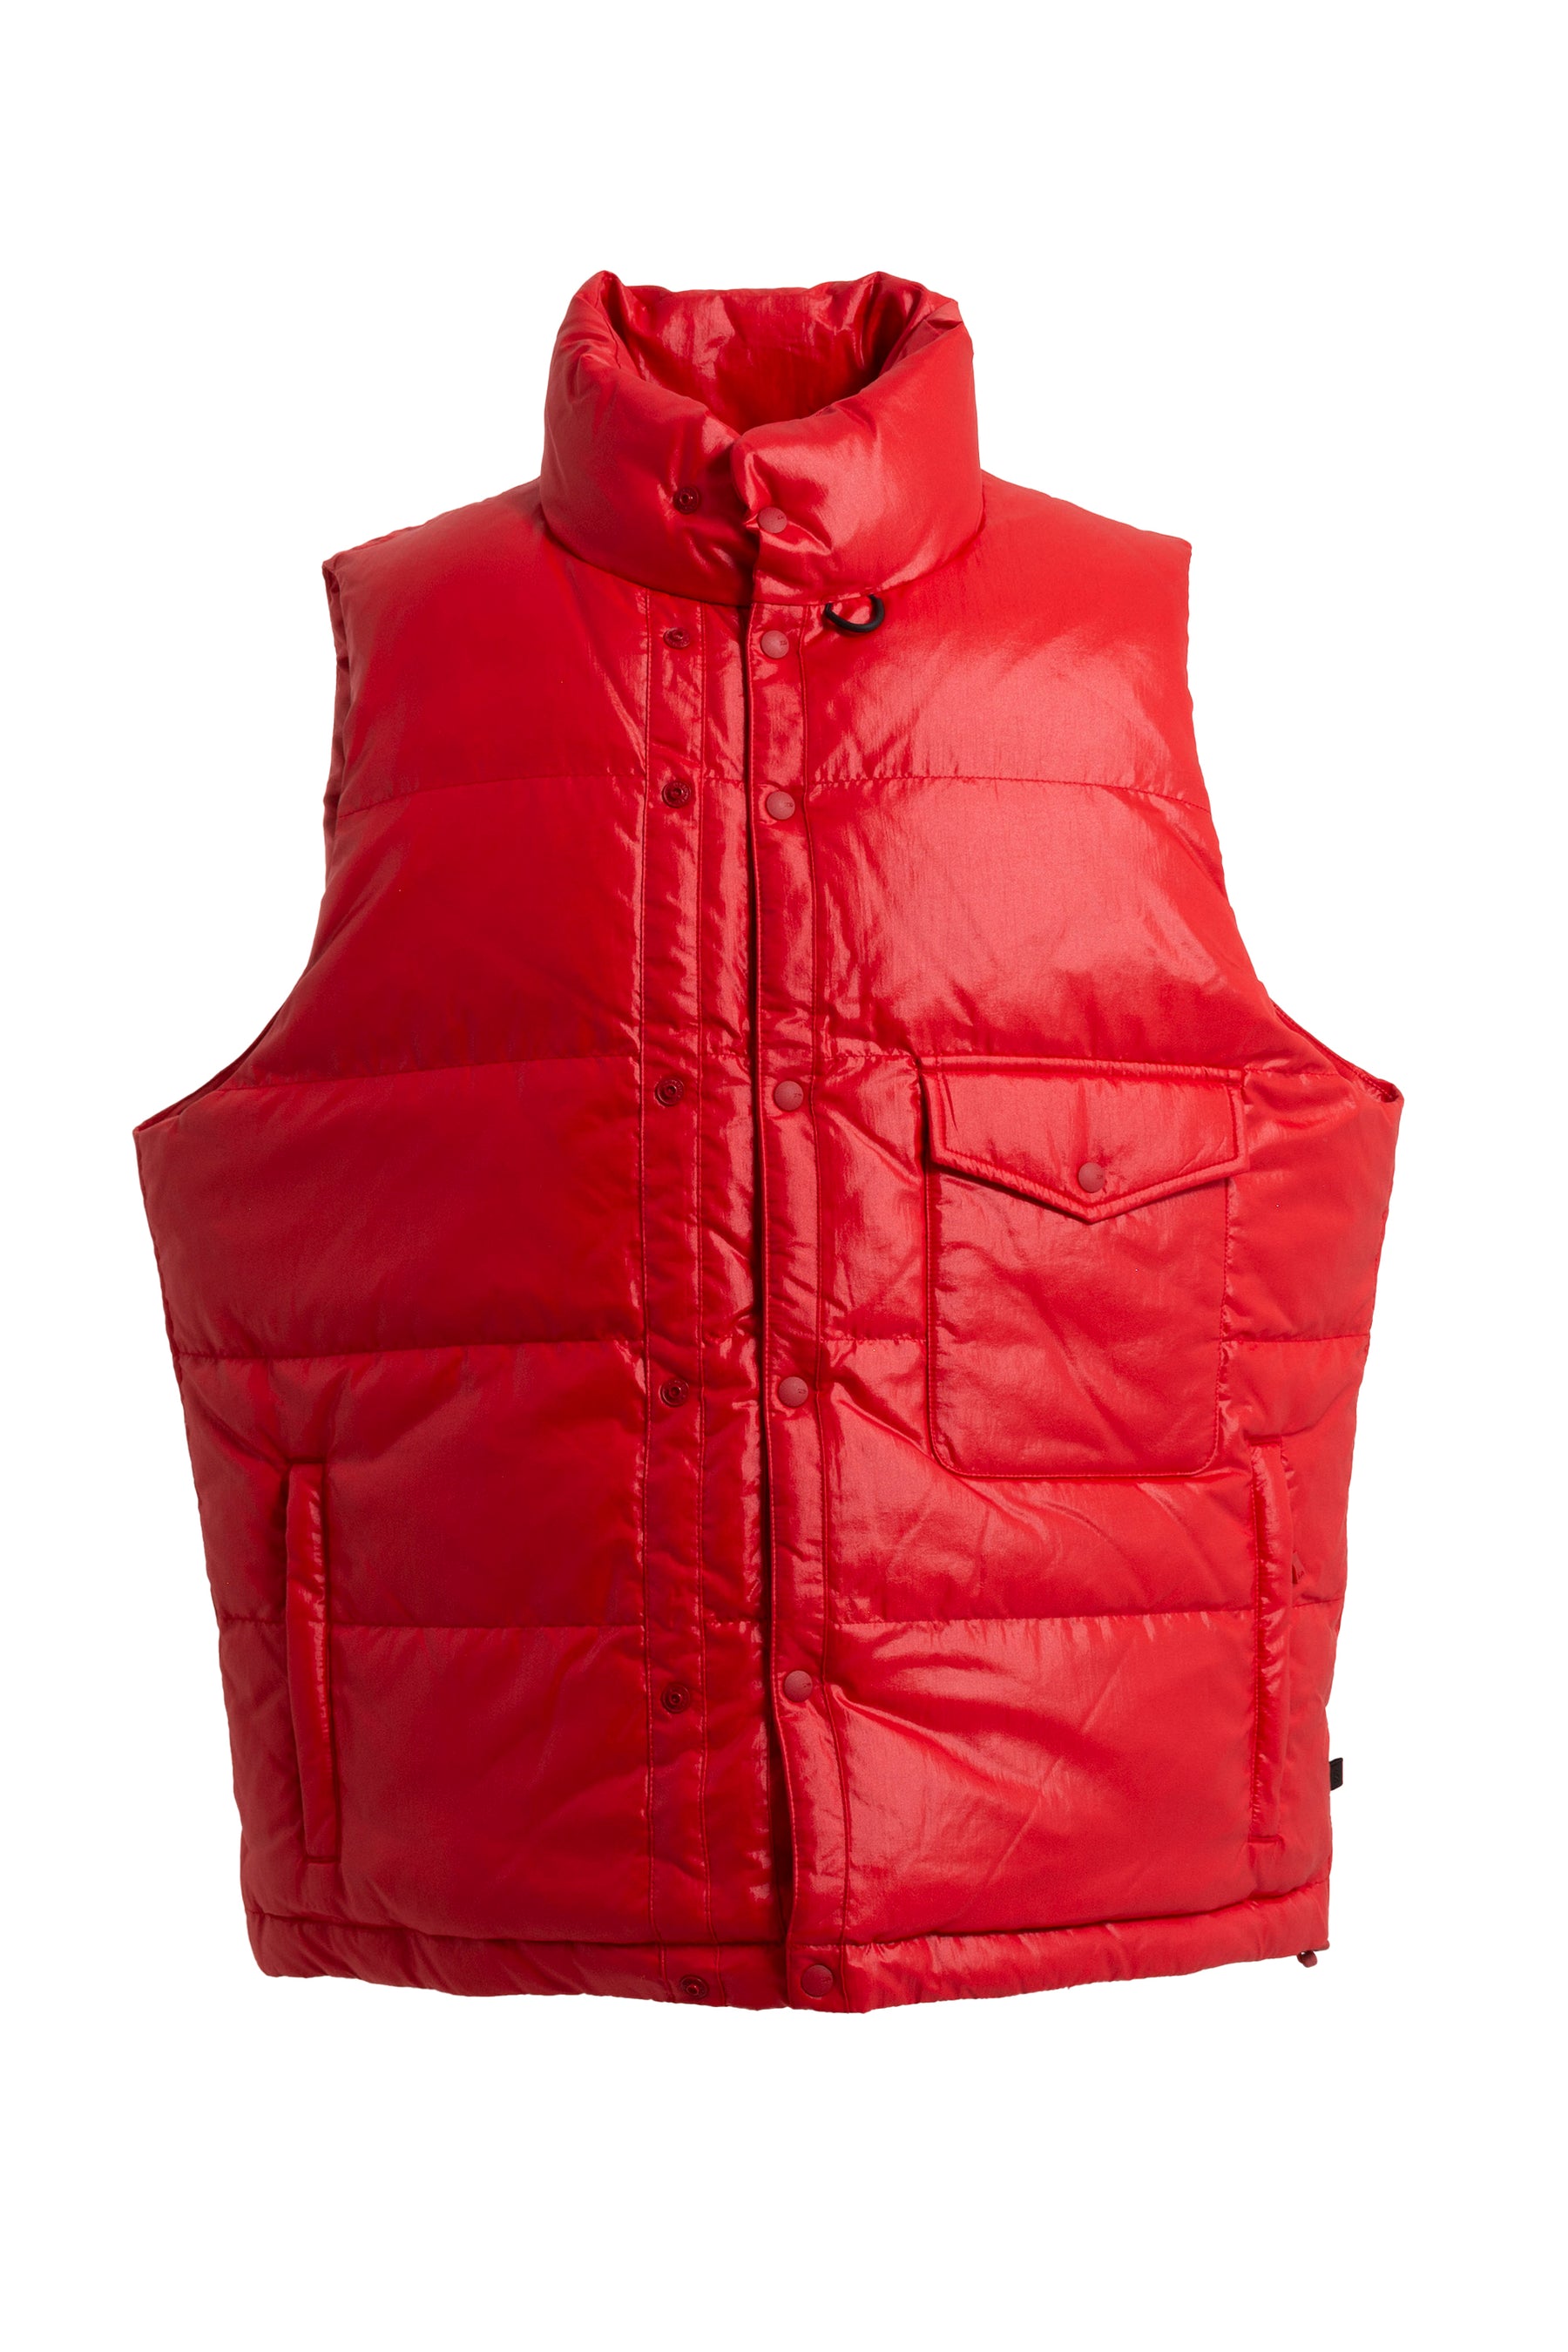 TECH CLIMBERS DOWN VEST / RED